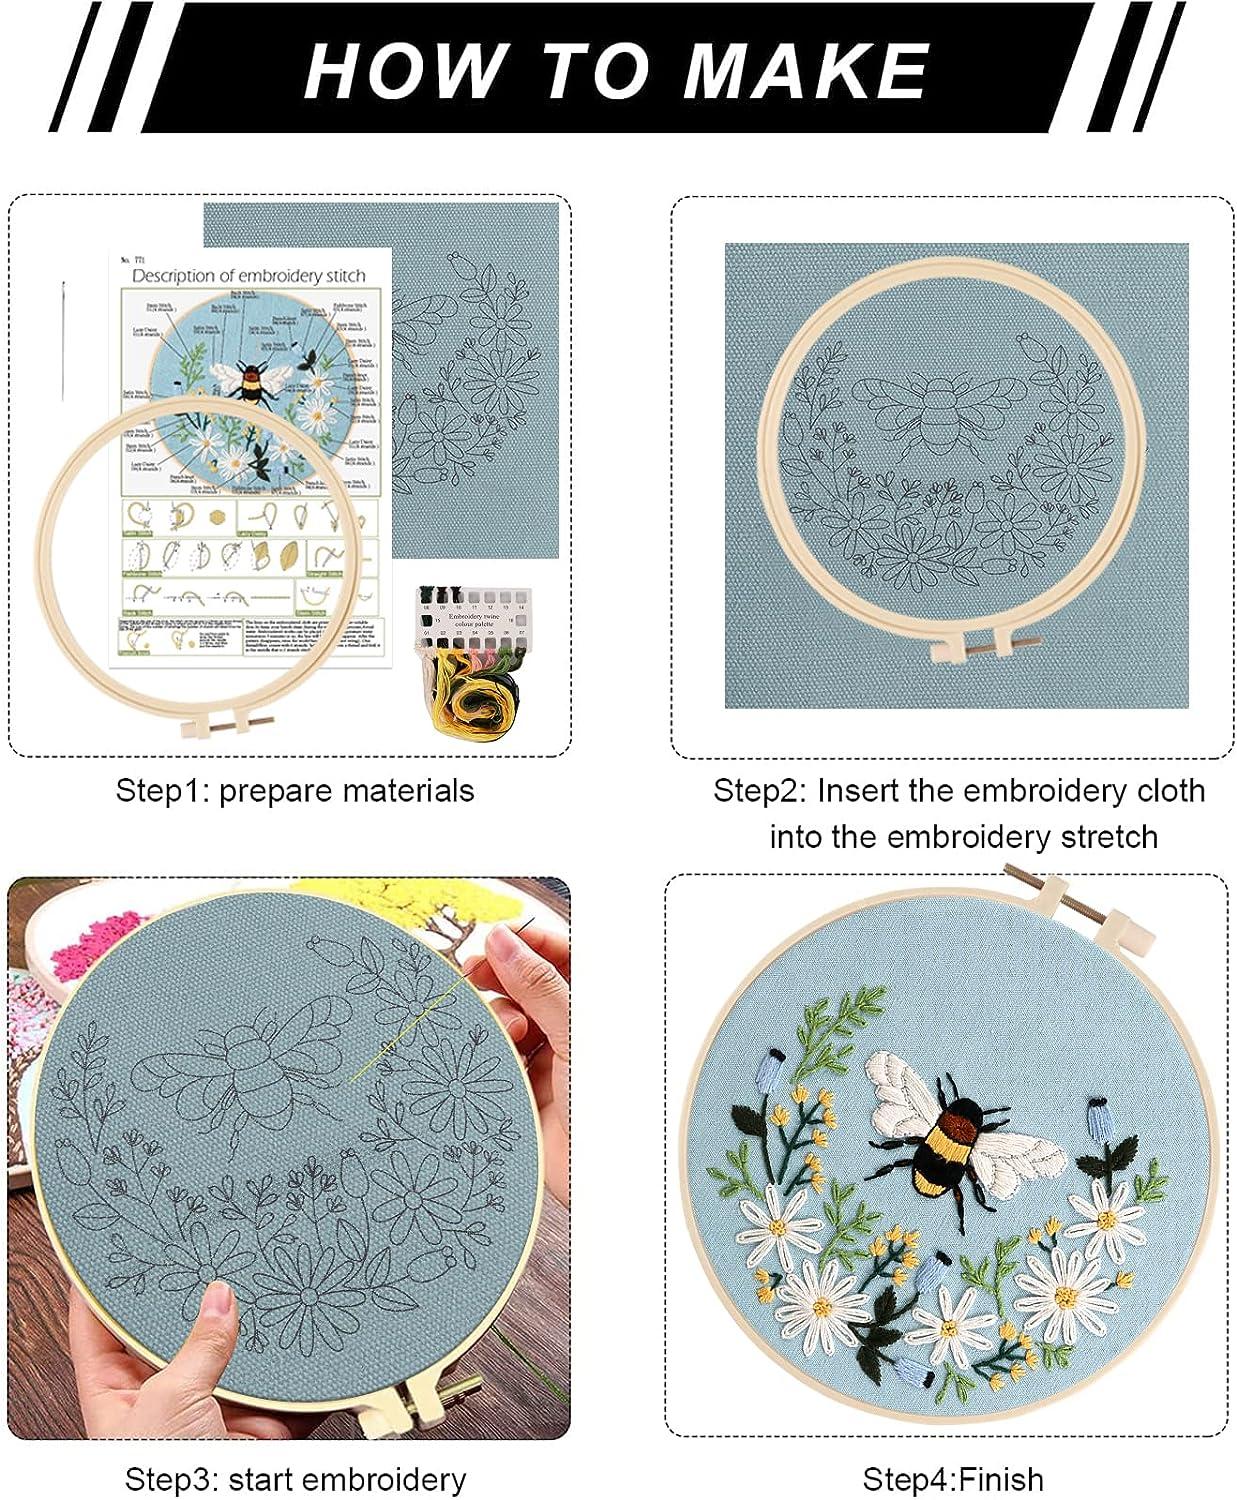 Lukinbox Embroidery Starter Kit for Beginners 3 Sets Cross Stitch Kits for  Adults Include Embroidery Clothes with Cute Bees and Flowers Patterns  Embroidery Hoop Threads Needles and Instruction